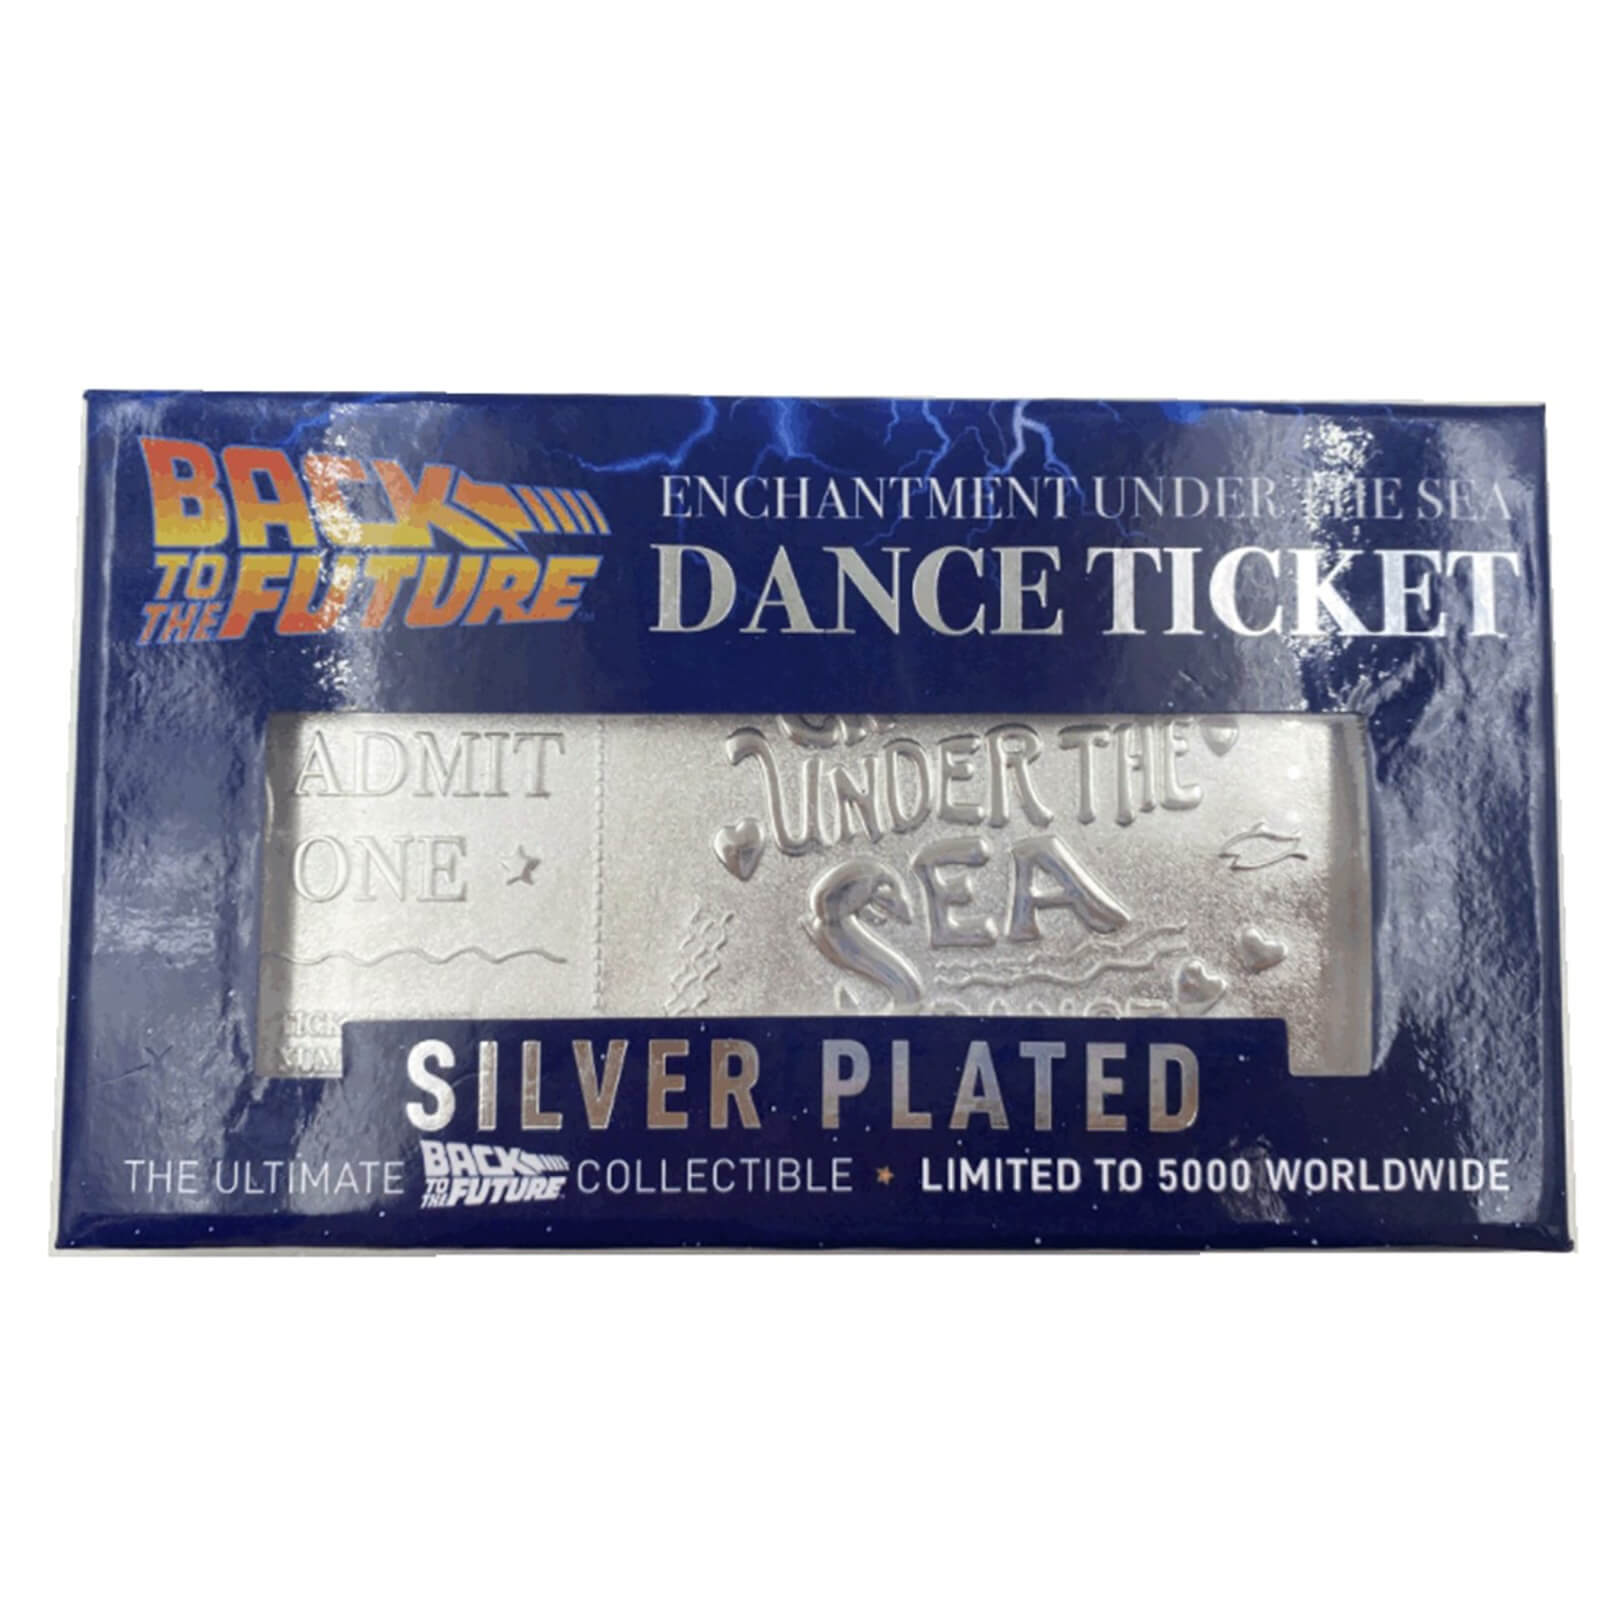 Image of Back to the Future Silver Plated Limited Edition Enchantment Under the Sea Dance Ticket